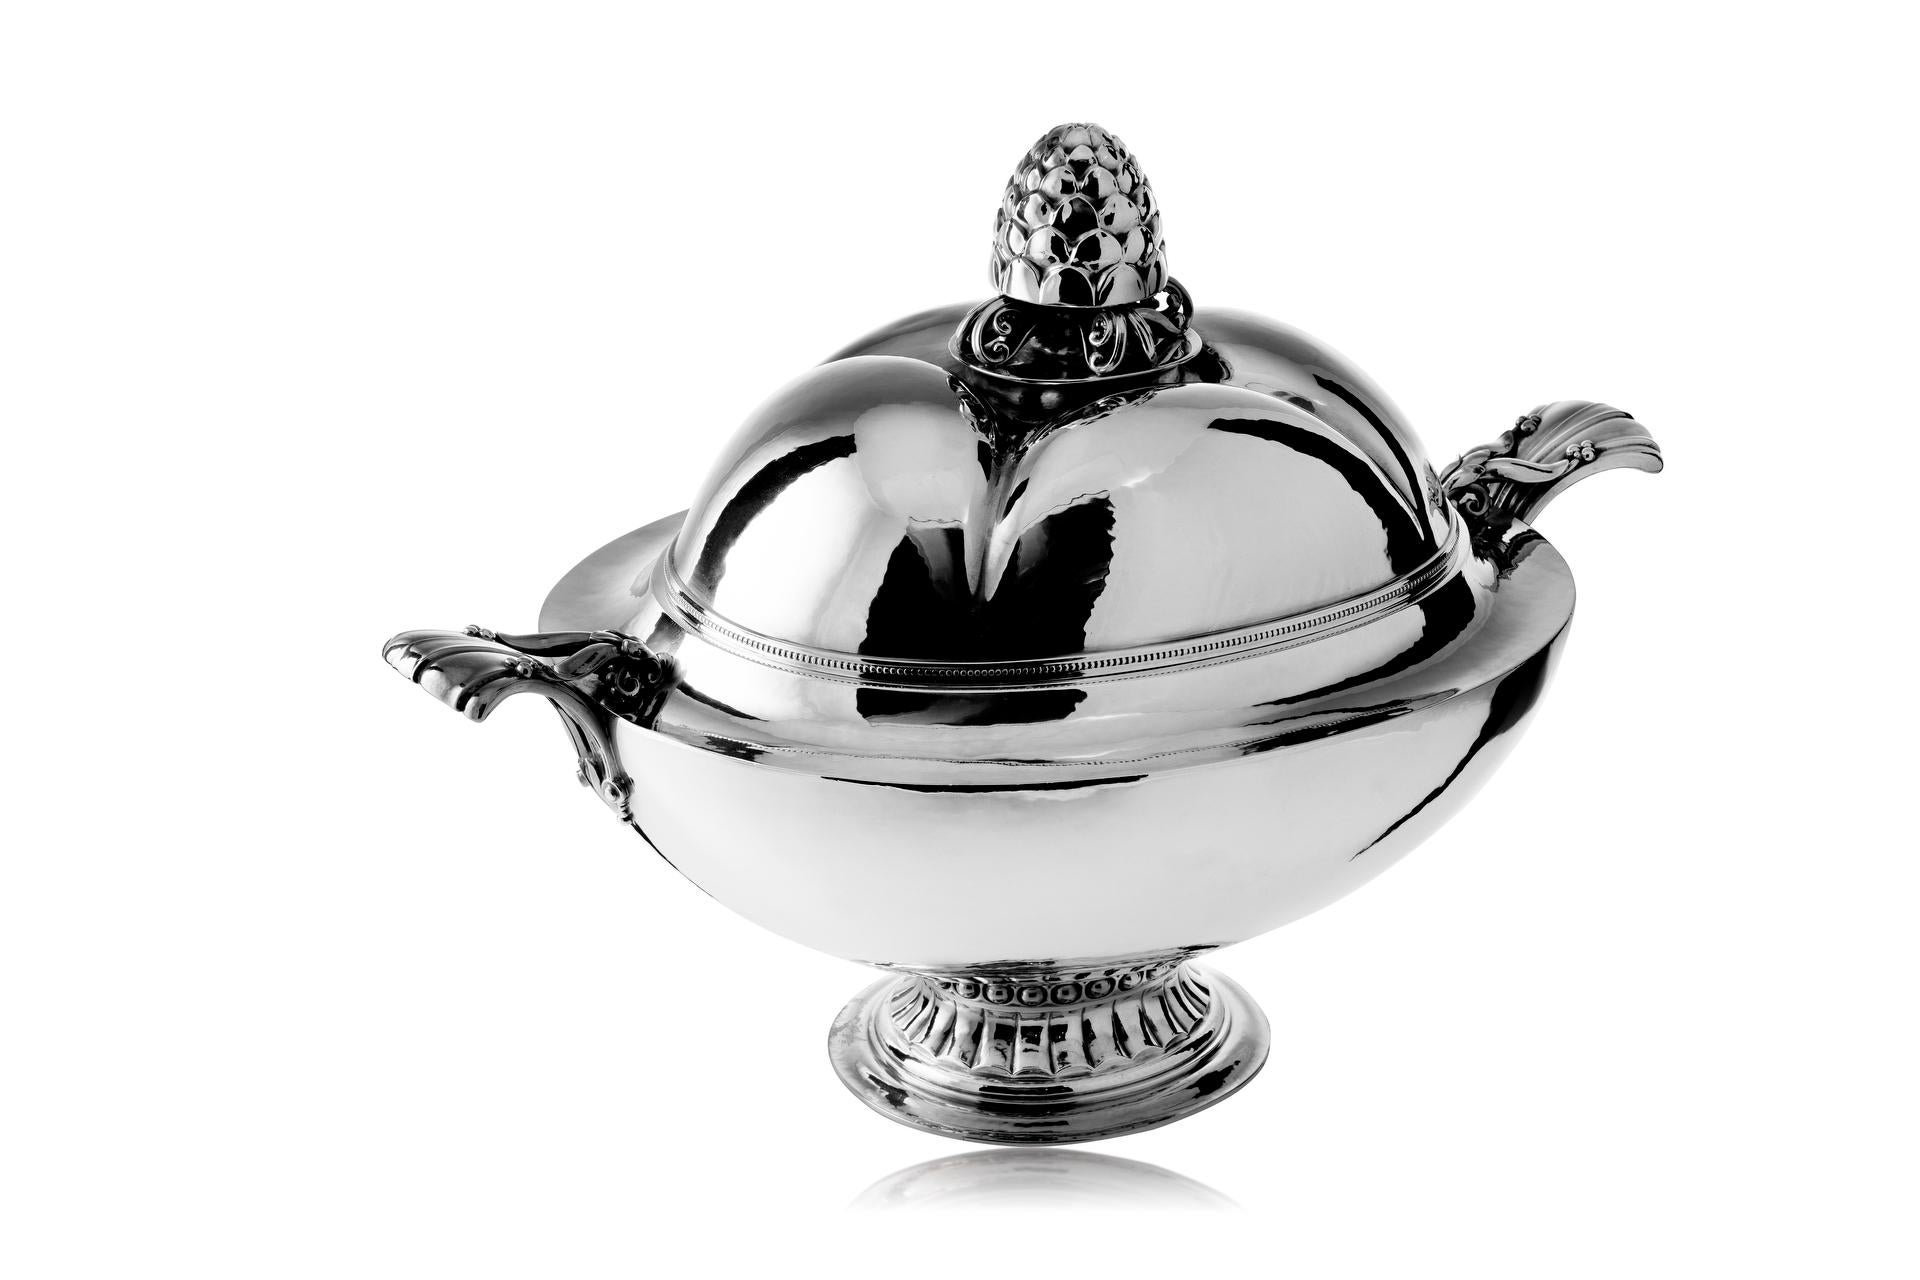 An Exquisite and Exceptionally Rare Georg Jensen Silver Centerpiece Tureen and Lid, Model 573, thoughtfully crafted by the visionary Georg Jensen in 1926. This remarkable creation stands as a testament to the unparalleled craftsmanship and artistic